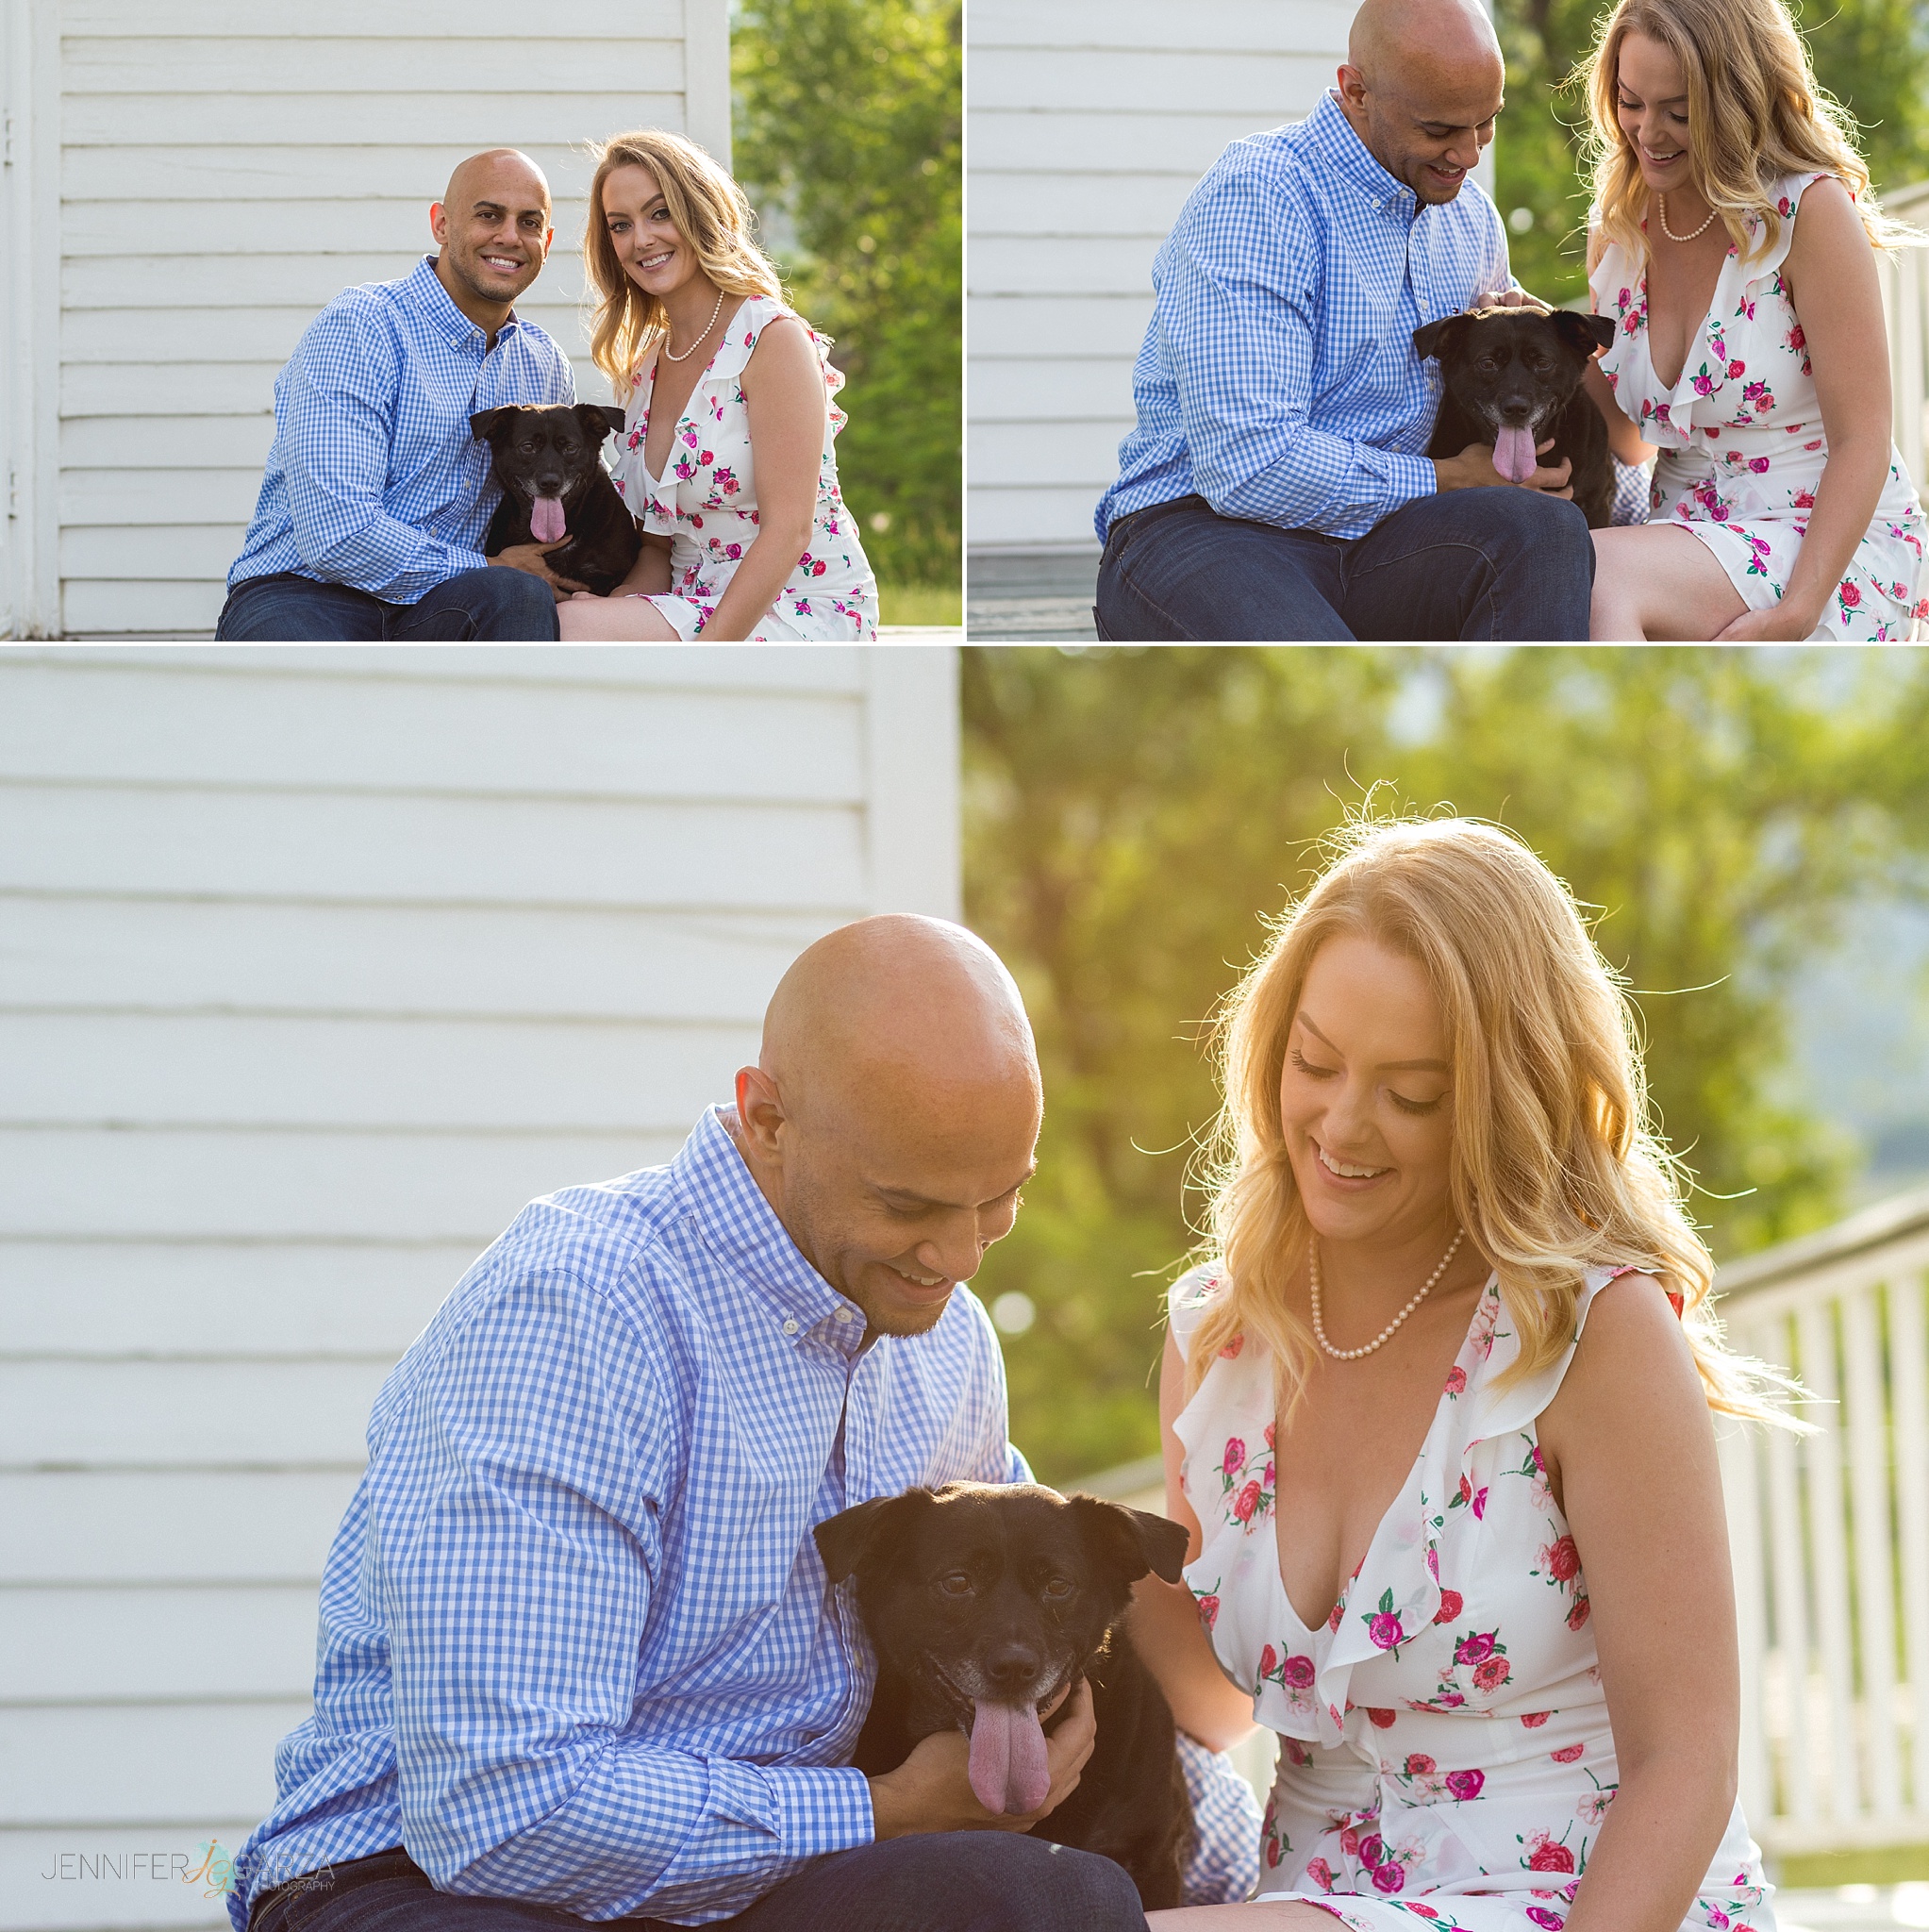 Kyley & Brian's Engagement Session with their pup at Clear Creek History Park. Photographed by Jennifer Garza Photography.